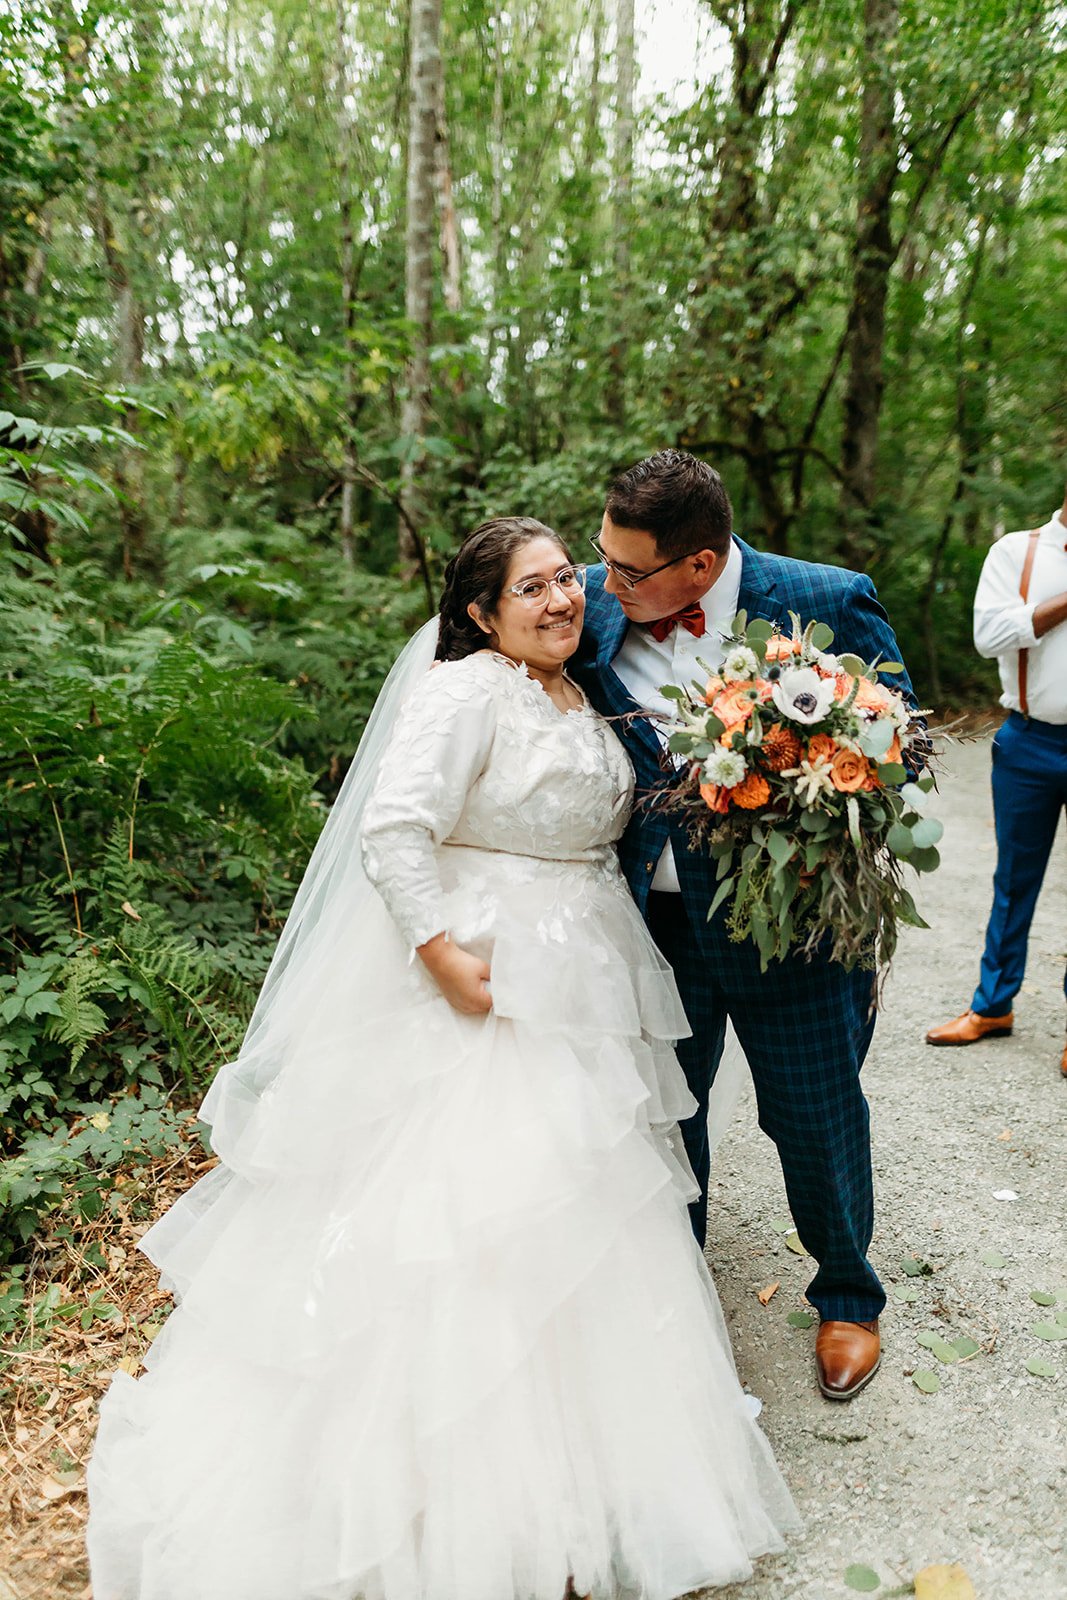 outdoor wedding ceremony in a wtoo ball gown